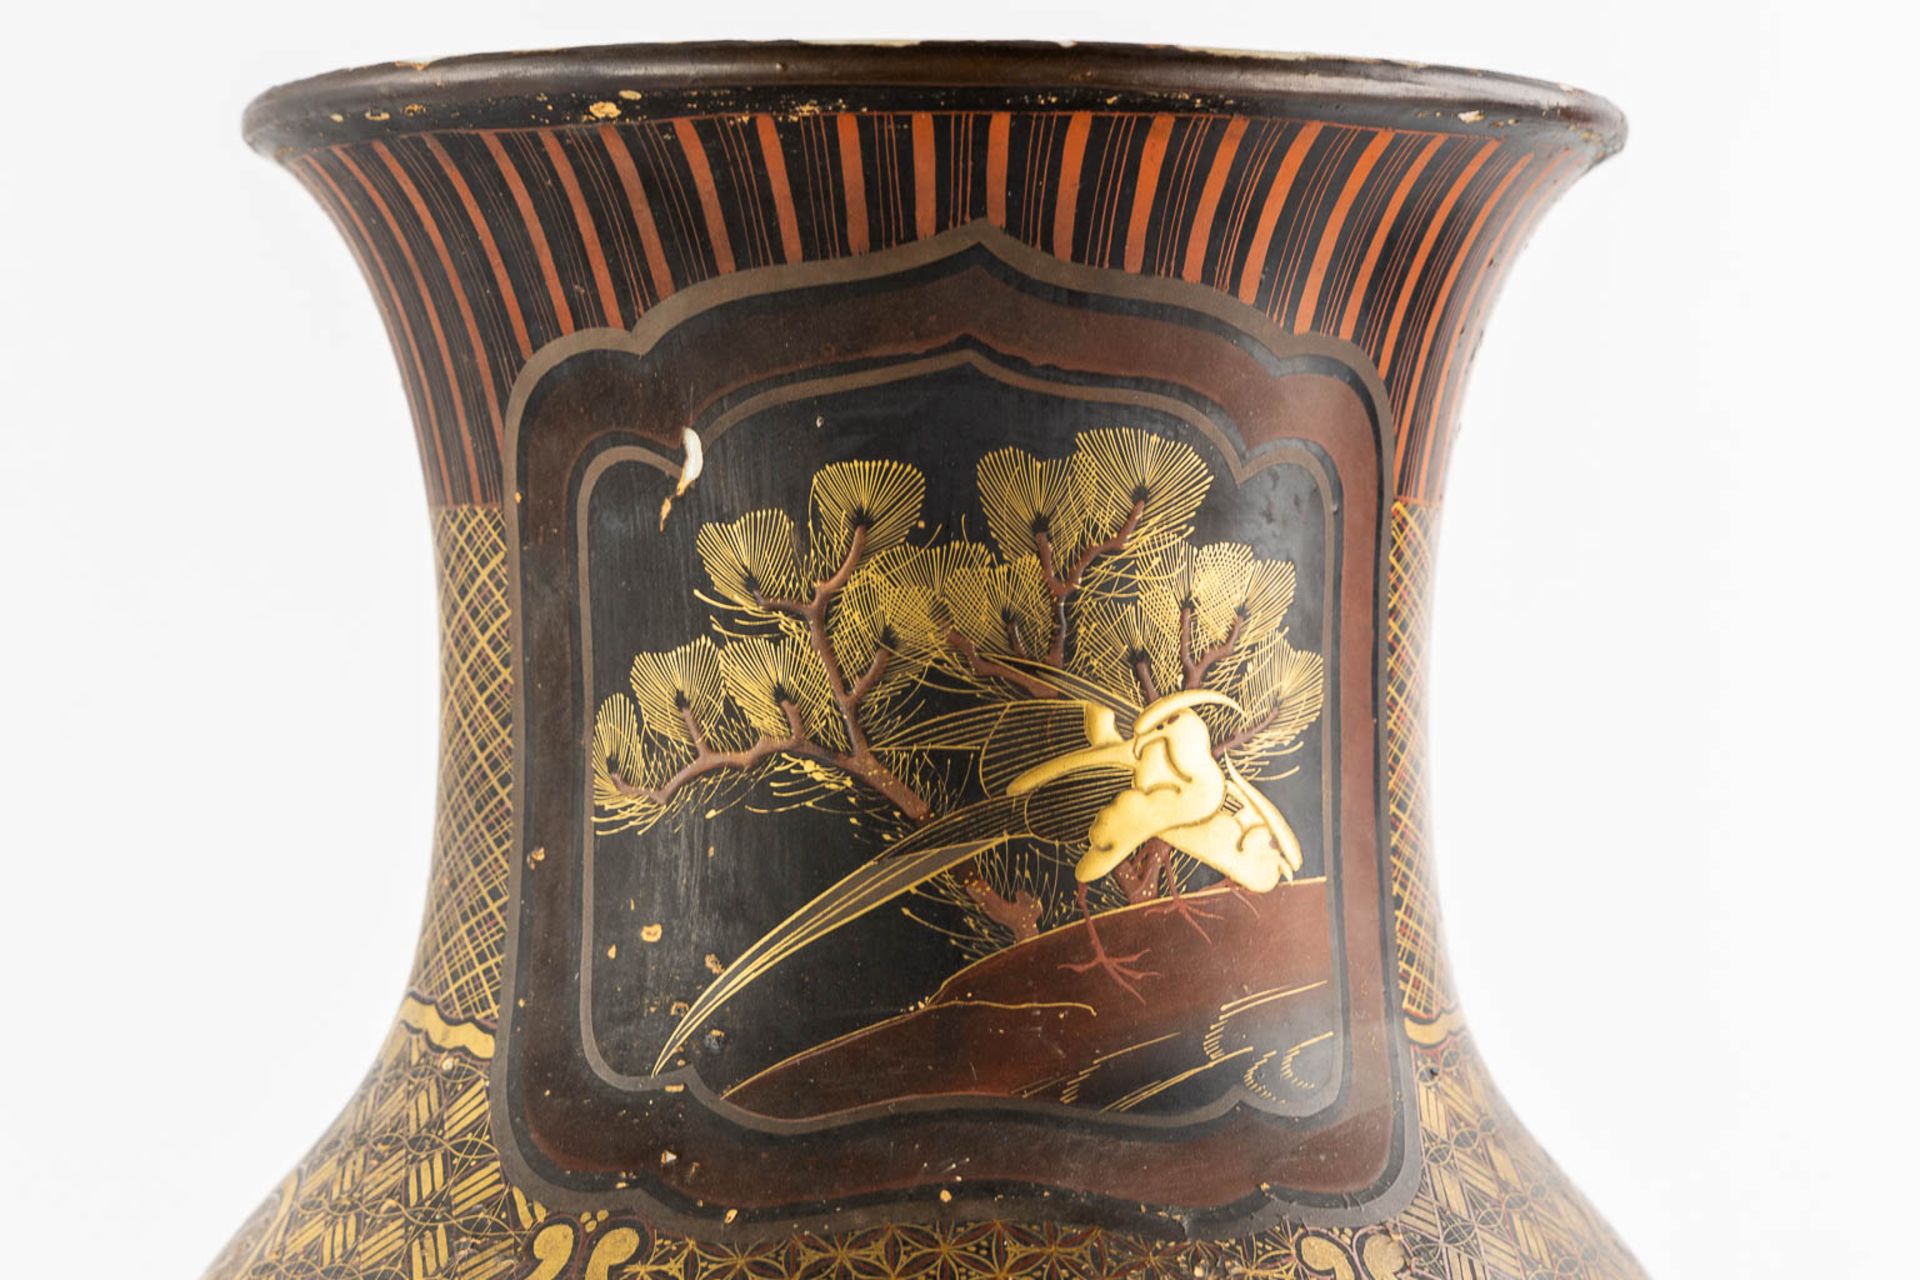 A Japanese porcelain vase, finished with red and gold lacquer. Meij period. (H:61 x D:27 cm) - Bild 12 aus 14